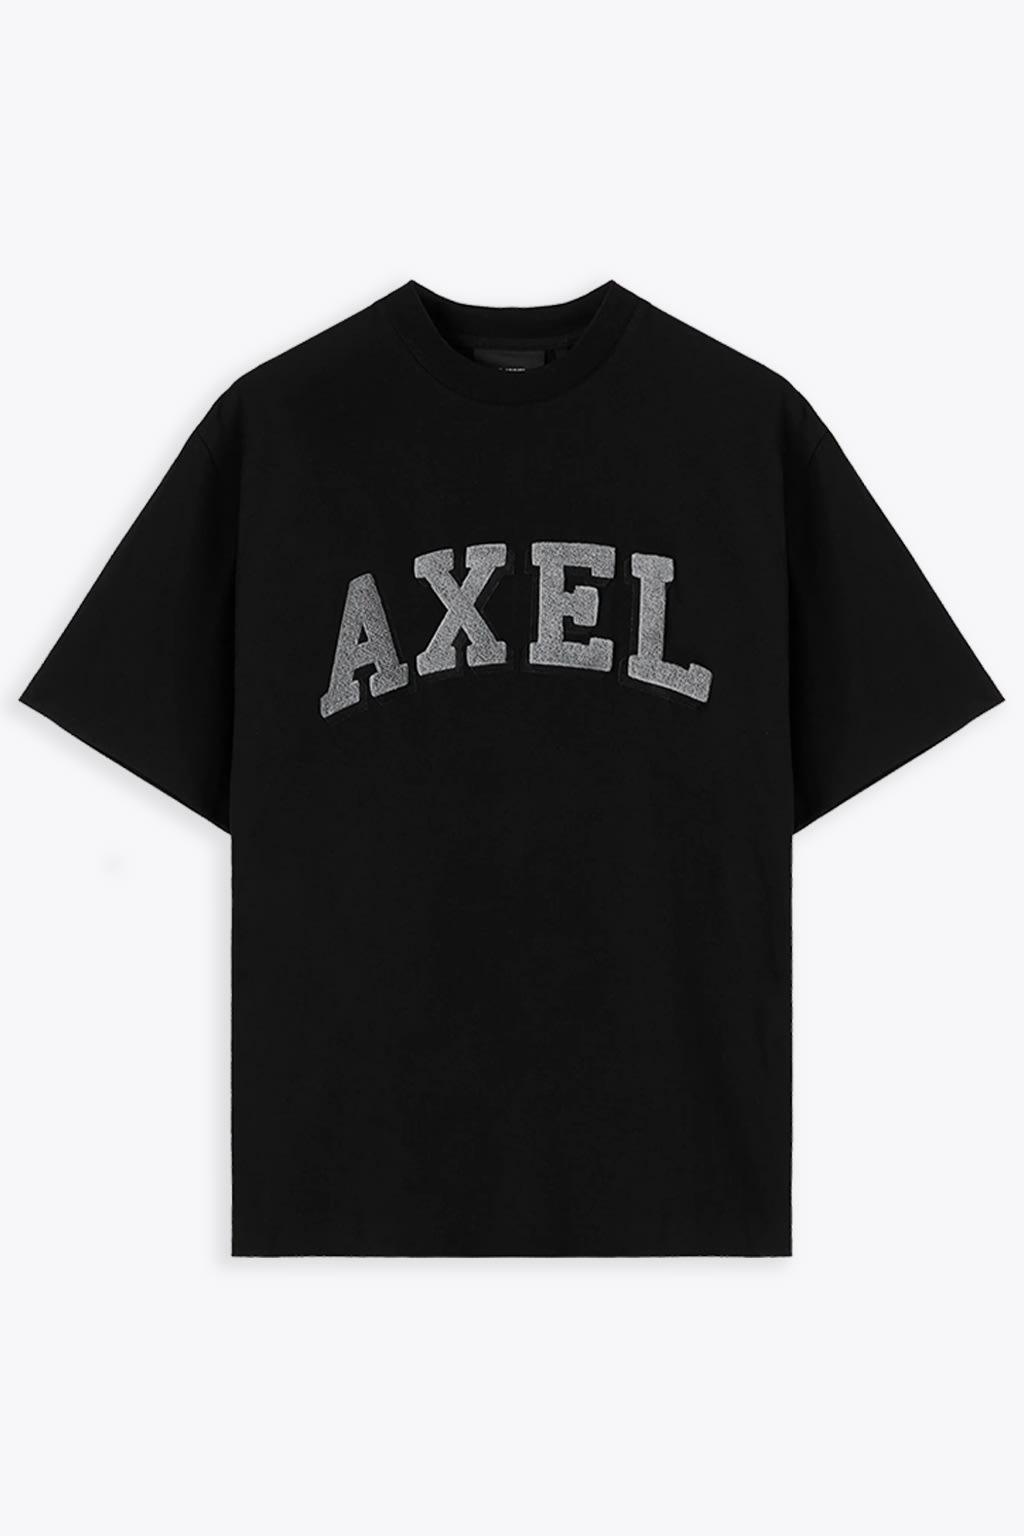 Axel Arigato Axel Arc T-shirt Black T-shirt With Arched Logo - Axel Arc ...